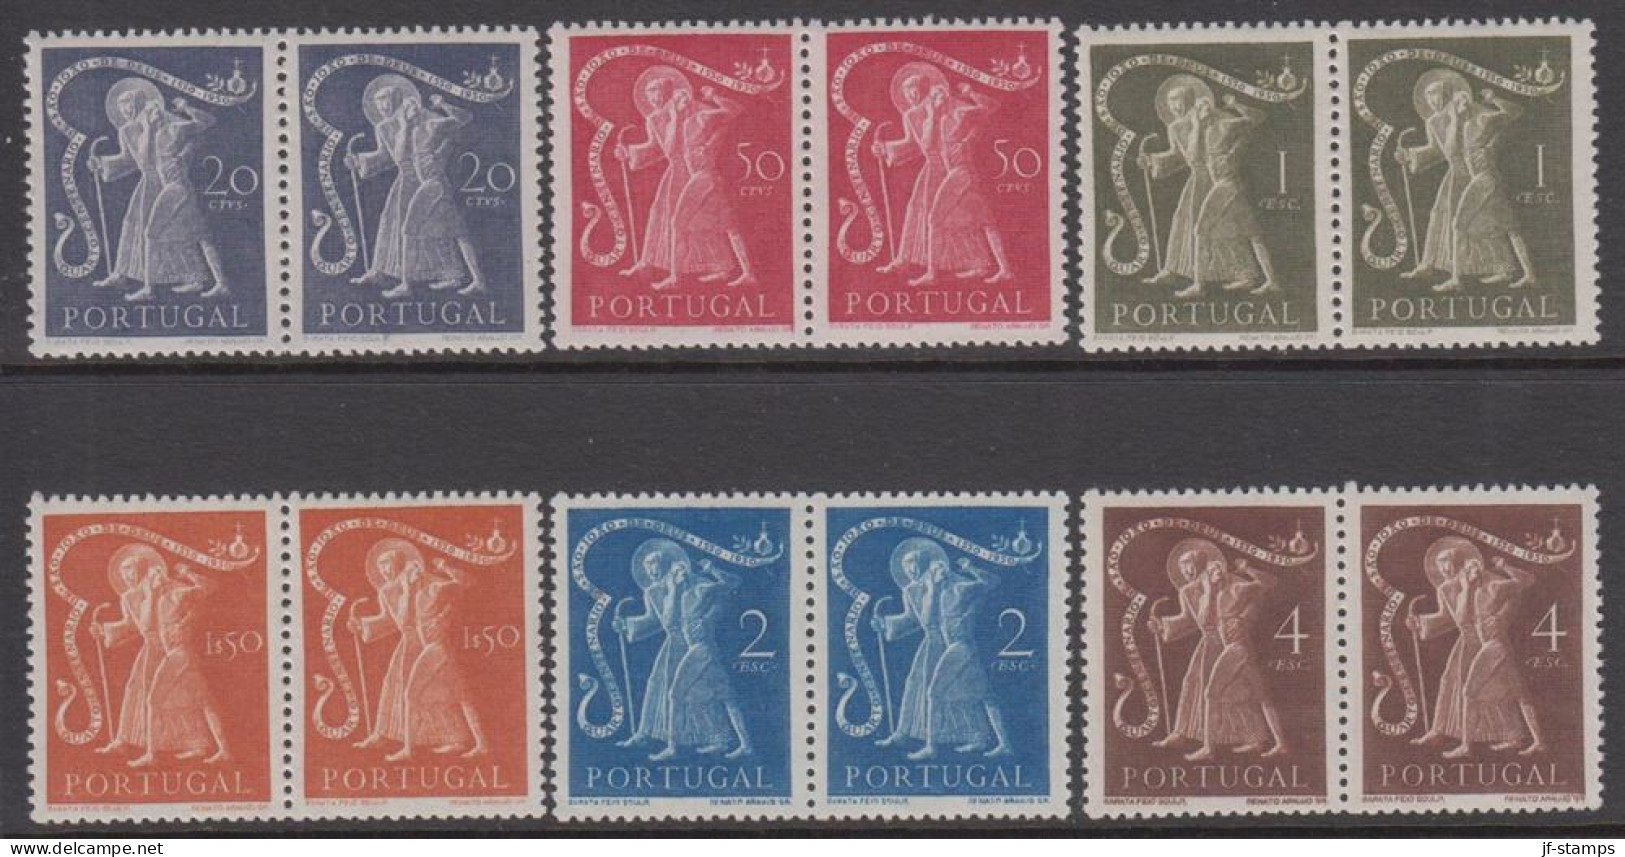 1950. PORTUGAL. JOAO DE DEUS. Complete Set With 6 Stamps In Pairs. Never Hinged. Beautifu... (Michel 752-757) - JF539234 - Nuevos